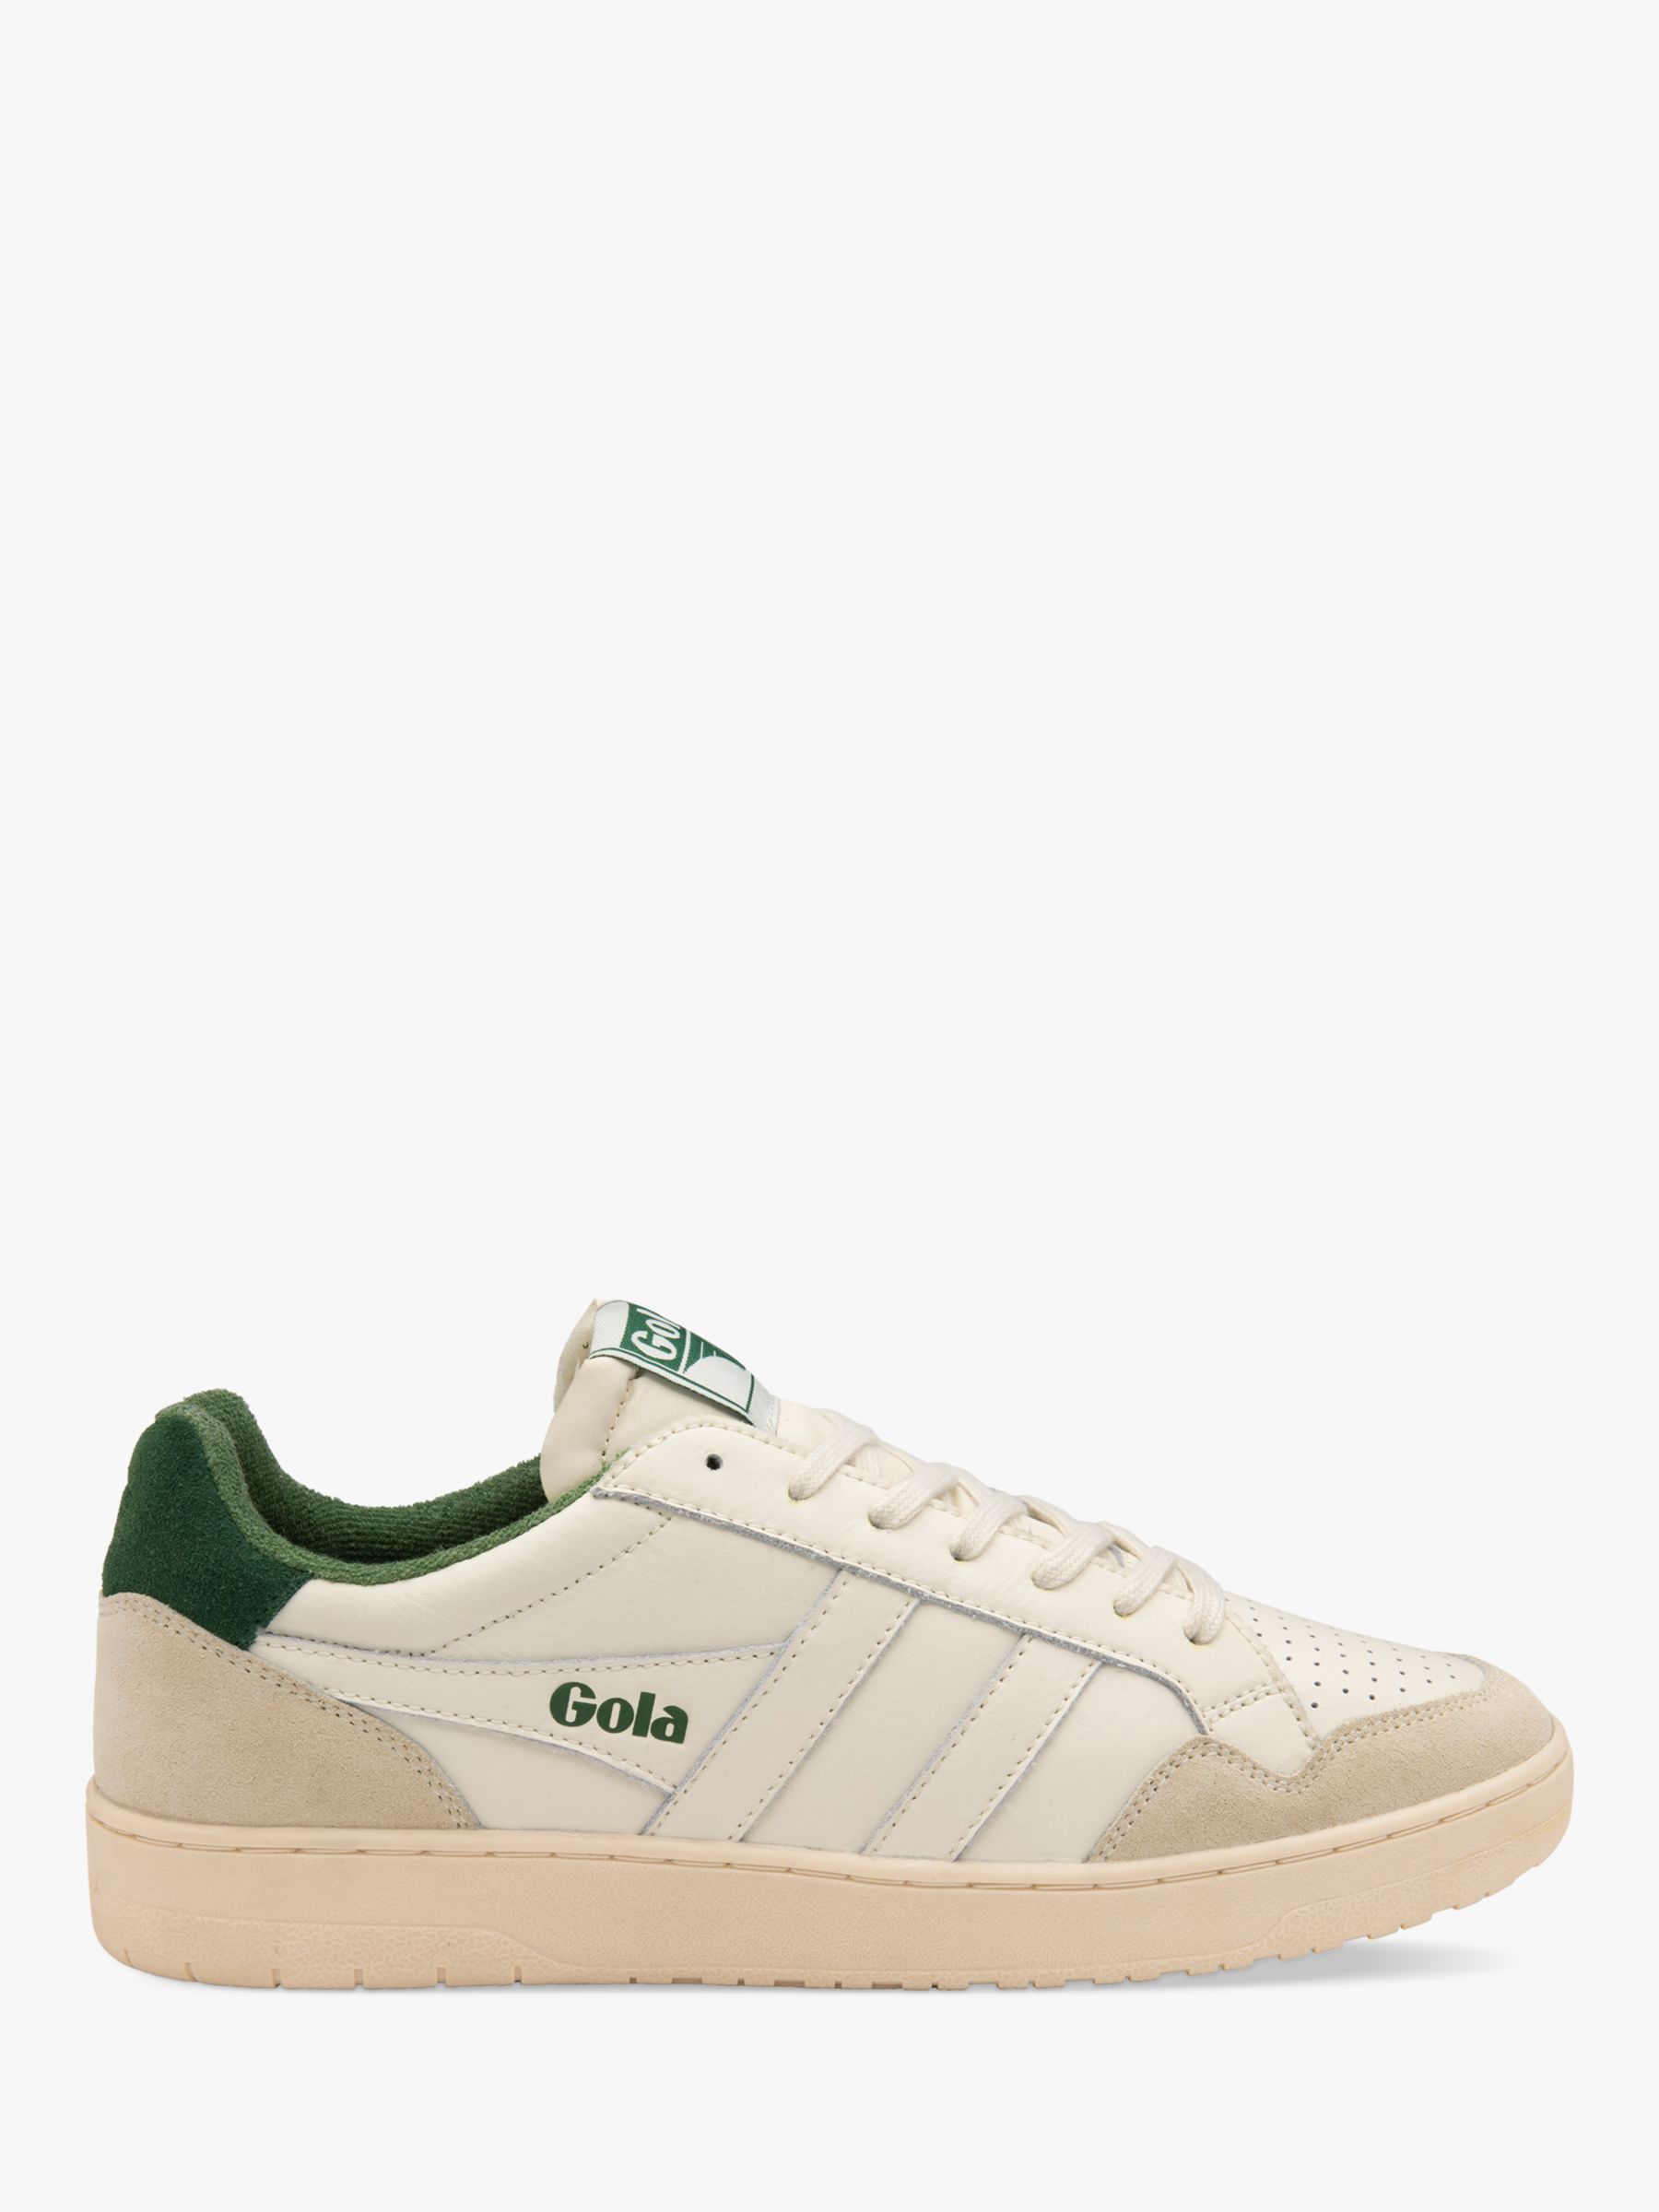 Gola Eagle Leather Lace Up Trainers, Off White/Evergreen, 10